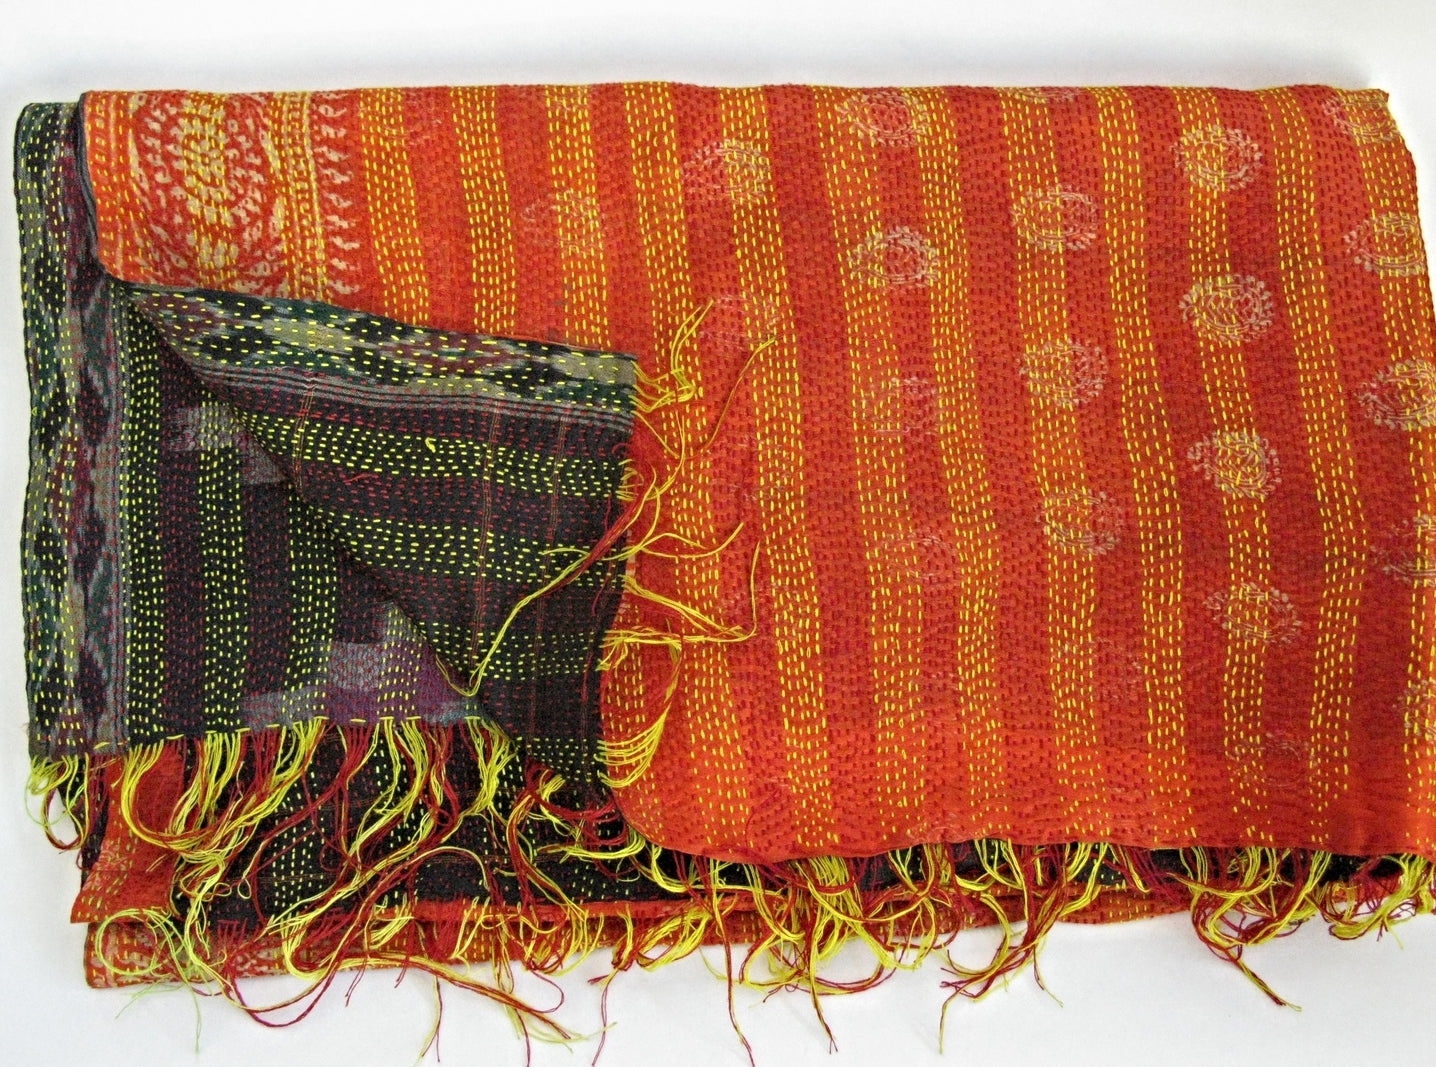 This beautiful, reversible silk shawl is made from two layers of silk, embroidered together using the traditional quilt running stitch. A persimmon pattern reverses to an ikat of black, plum, fir and gray clay colors.Wear as a wrap or drape on sofa or chair. Hand woven and embroidered in India.